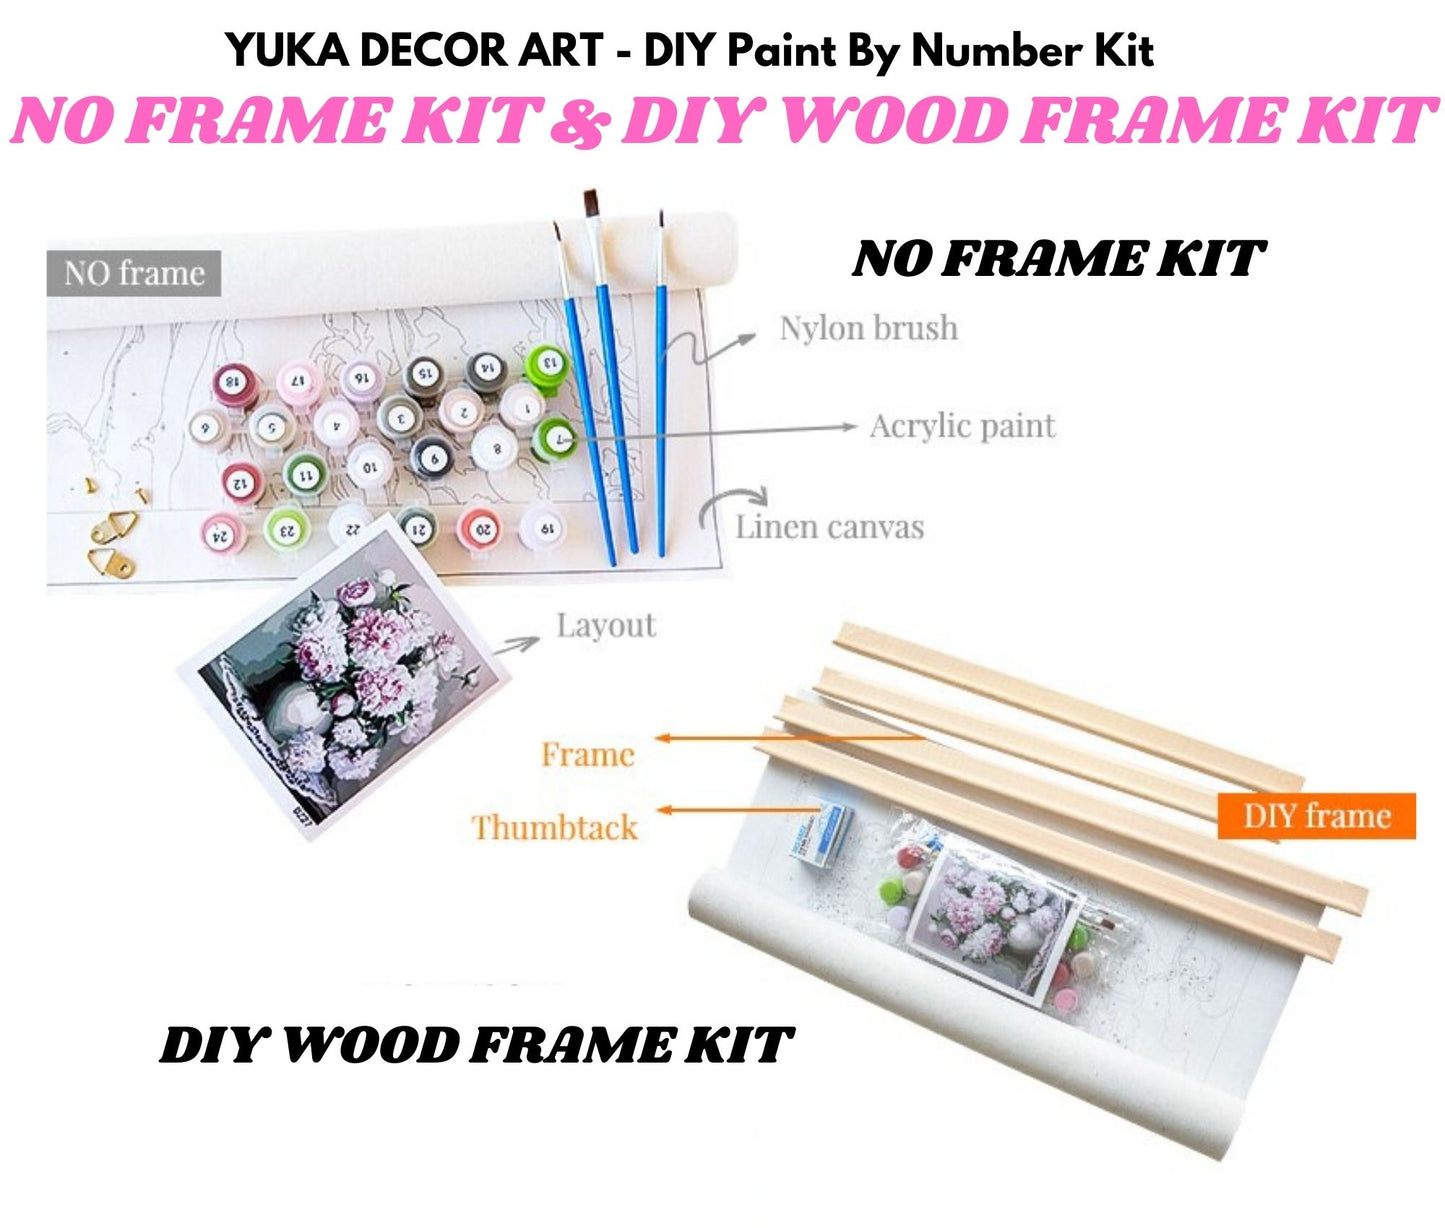 CAT GAZING OUT OF THE WINDOW  - DIY Adult Paint By Number Kit